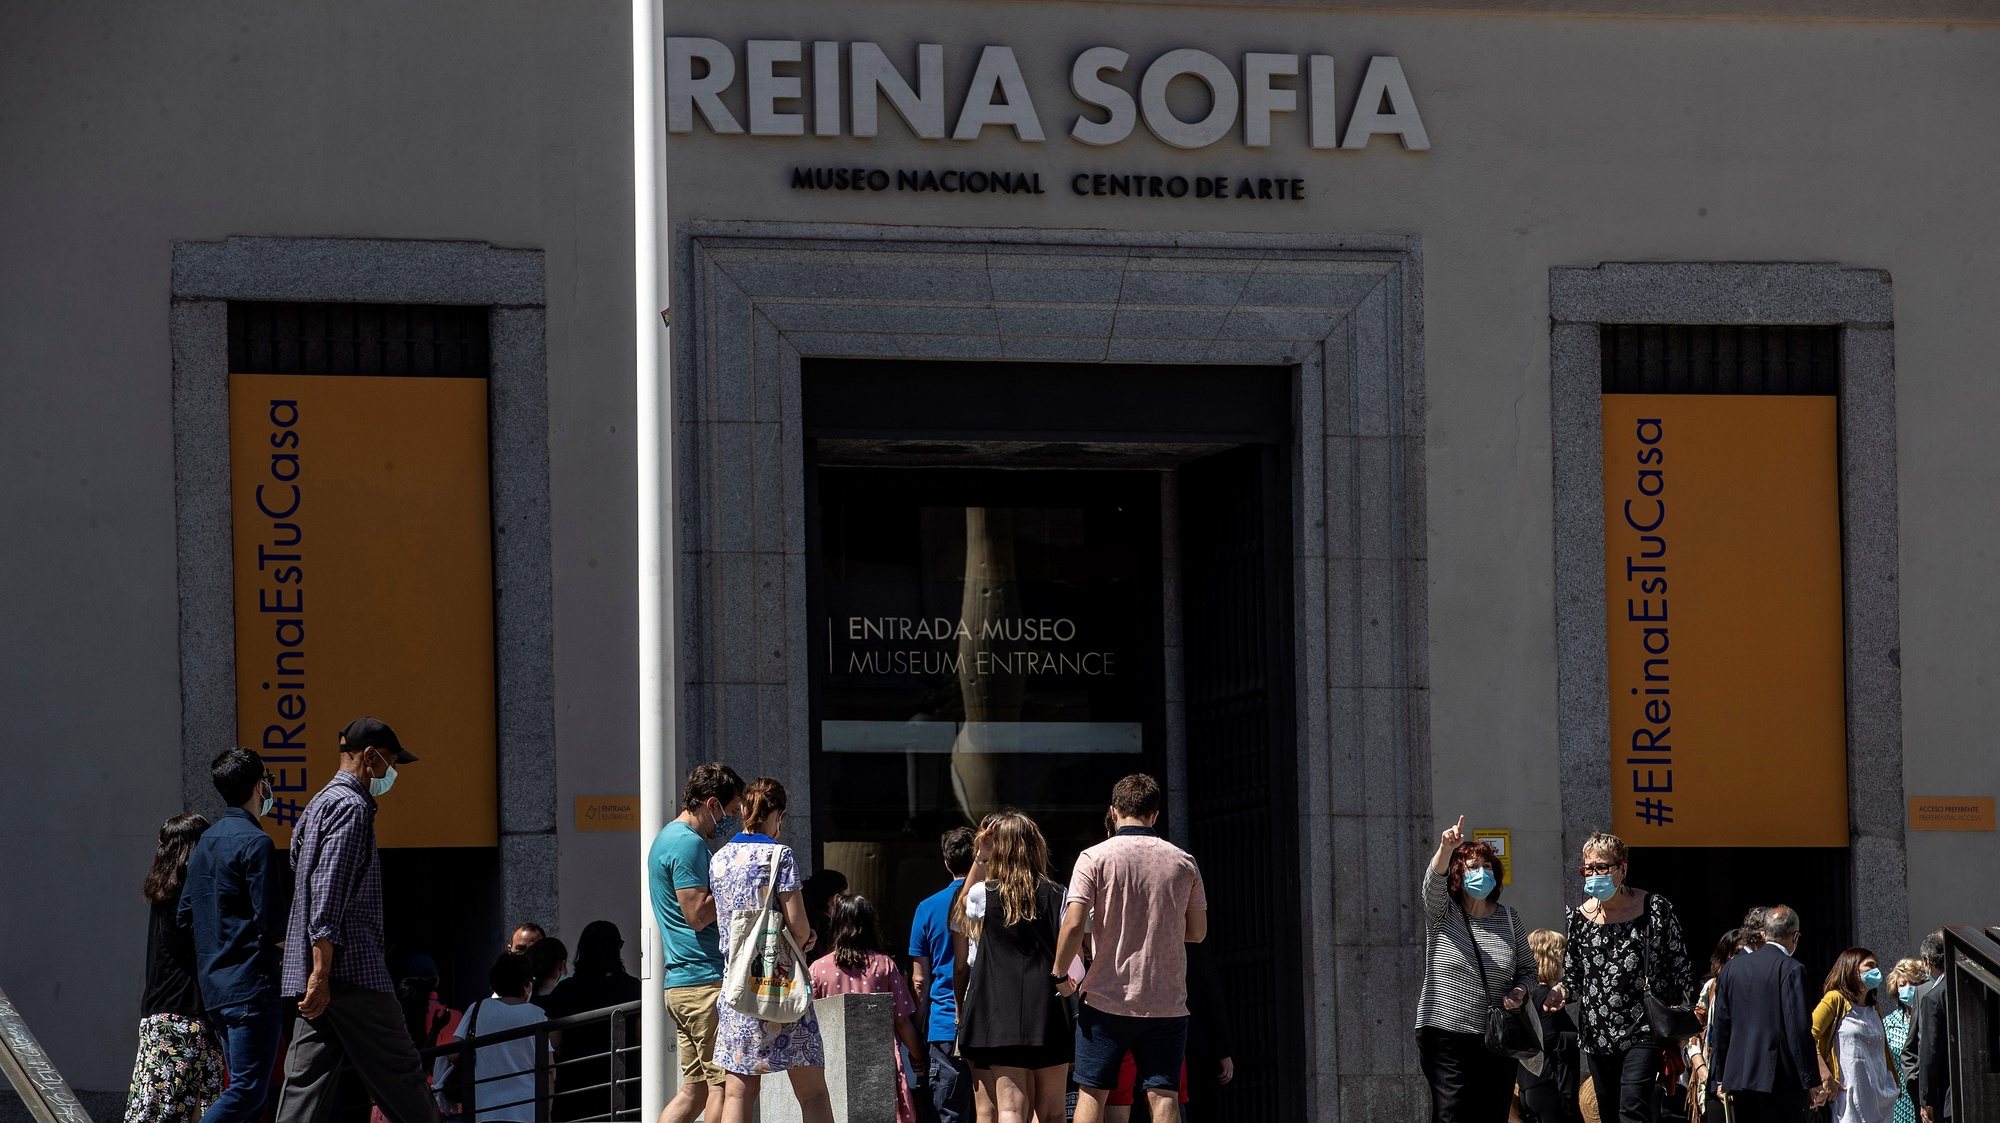 epa08468629 Visitors queue at the entrance to the Reina Sofia Museum on its reopening day in Madrid, Spain, 06 June 2020. El Prado, Thyssen-Bornemisza and Reina Sofia Museums are reopening 06 June 2020 in the Spanish capital with new security measures implanted because of the coronavirus health crisis.  EPA/CHEMA MOYA